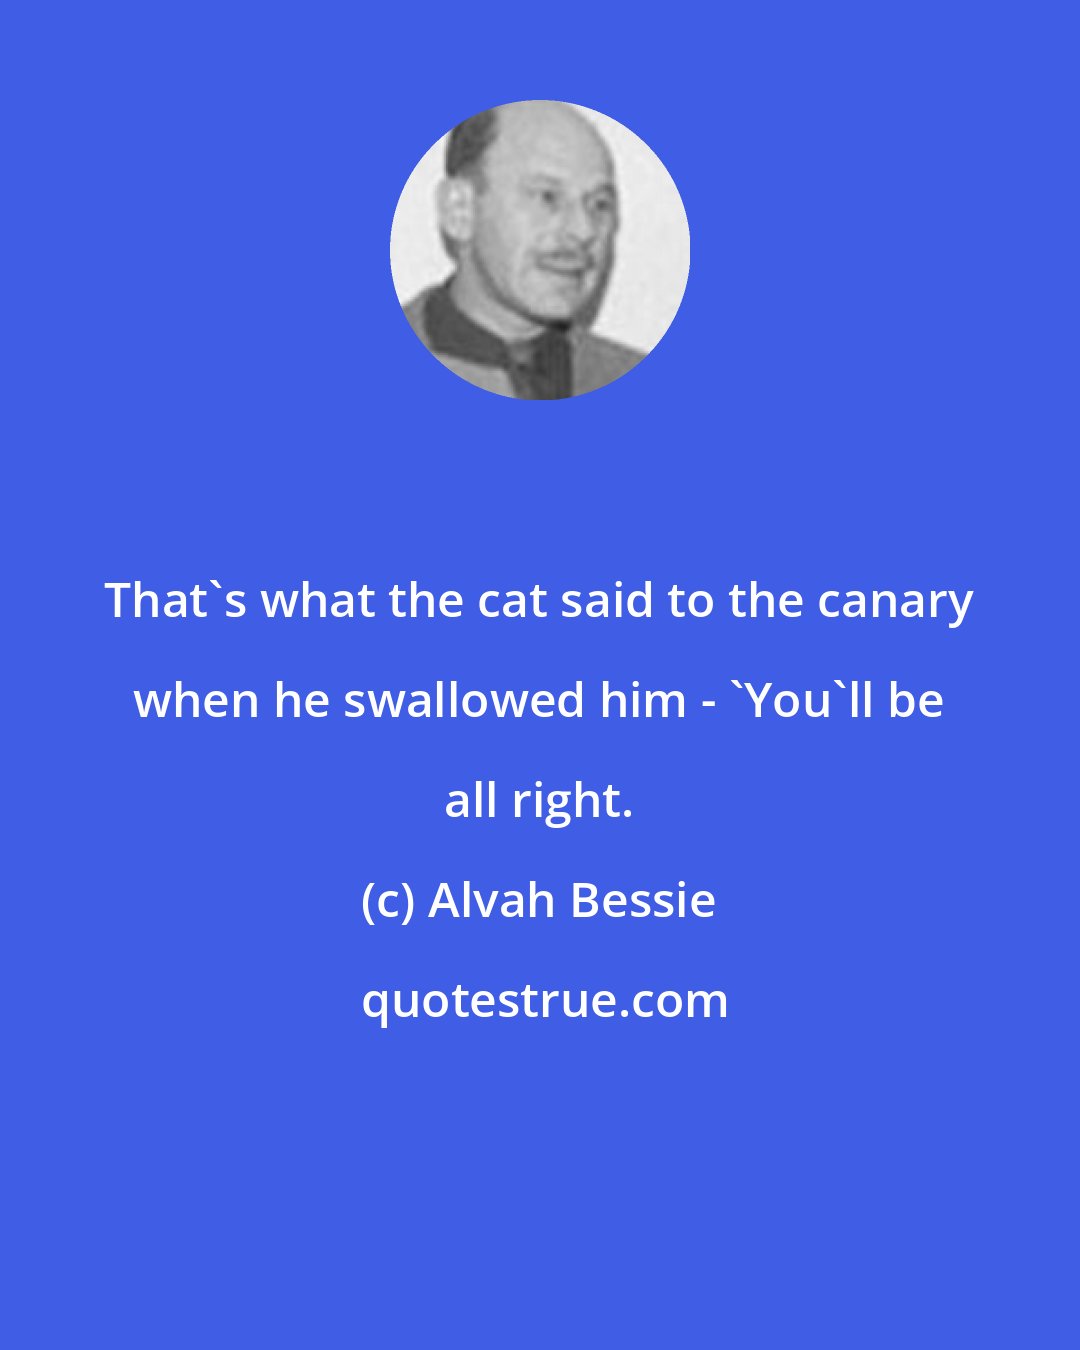 Alvah Bessie: That's what the cat said to the canary when he swallowed him - 'You'll be all right.